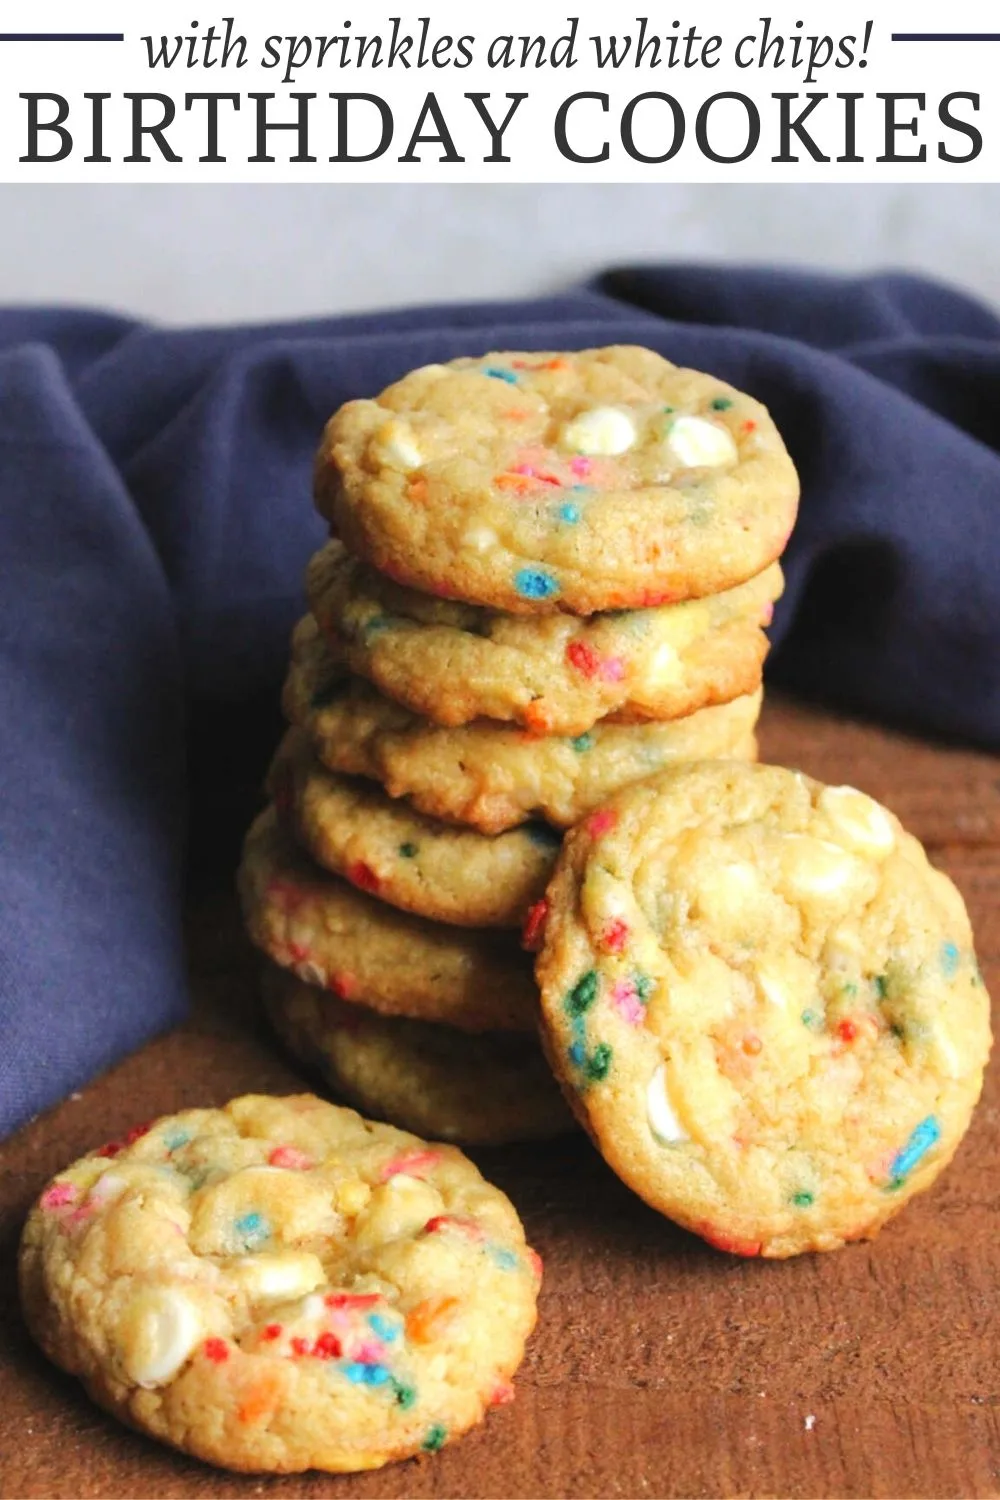 Funfetti birthday cookies are loaded with sprinkles and white chocolate chips. They are like a party in chewy cookie form. Make a batch for a birthday, or just because. 